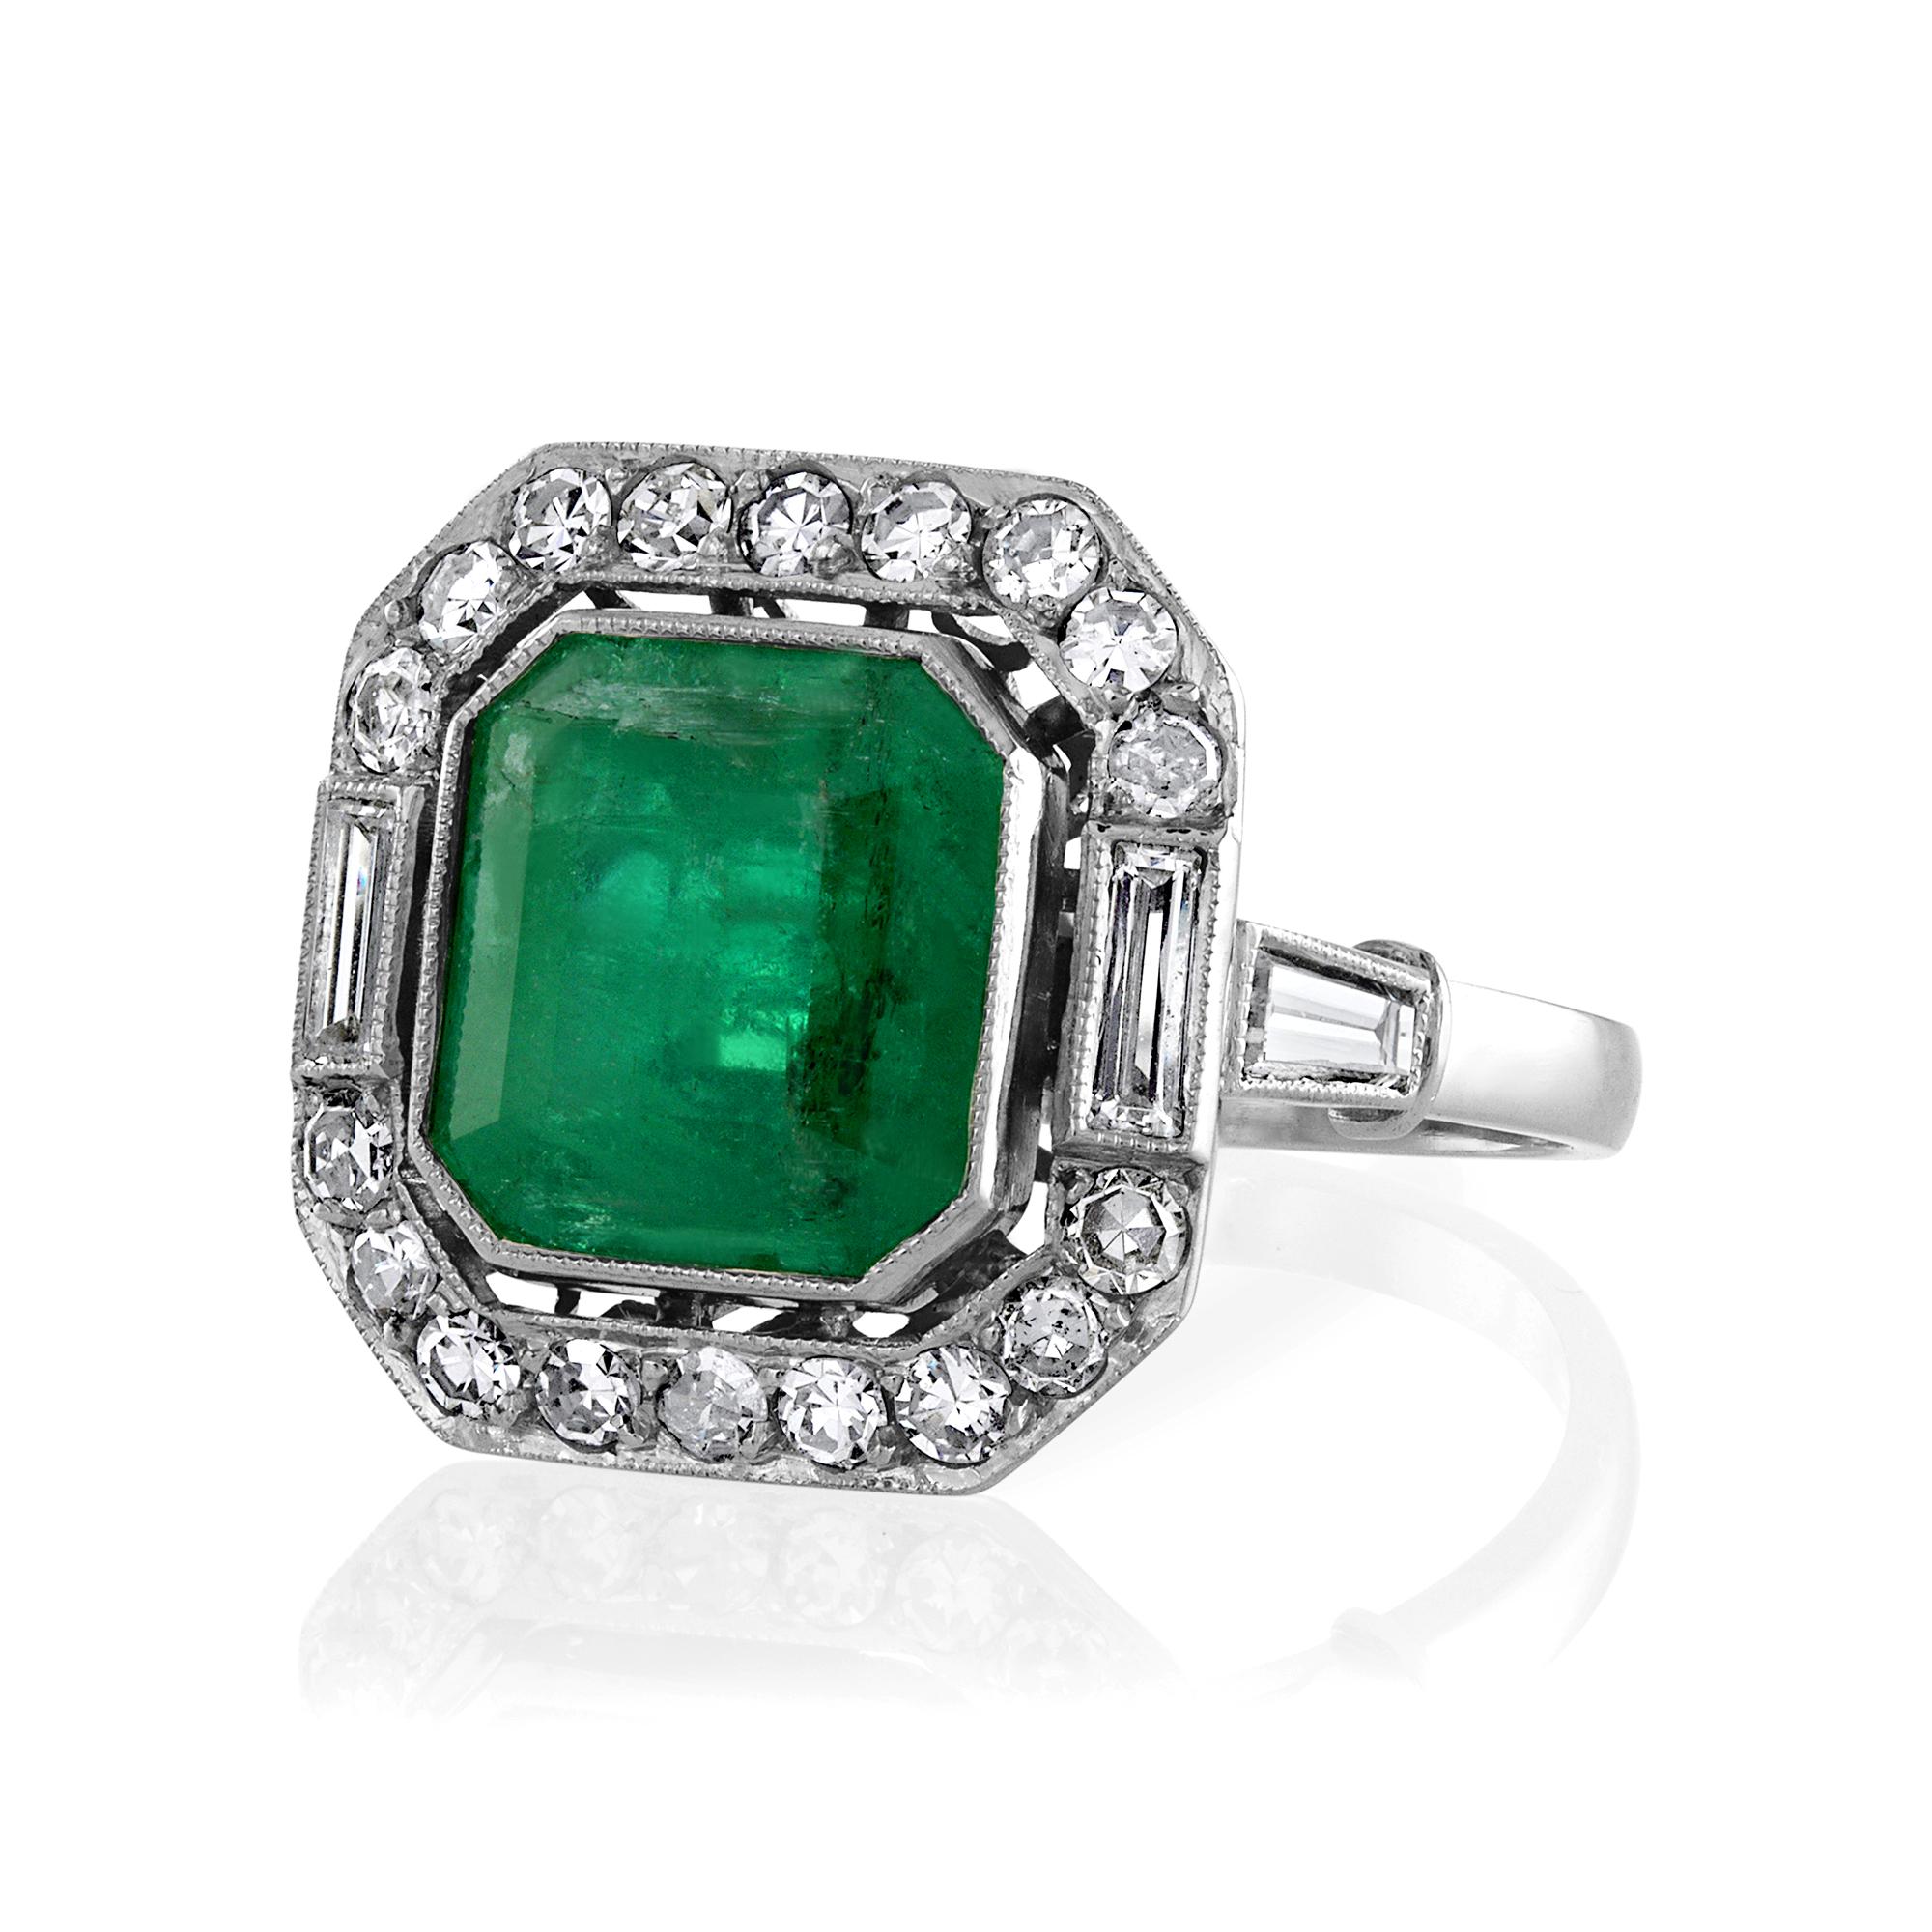 This Fine Bright Green Emerald and Diamond Art Deco Style Ring is a perfect alternative to a traditional engagement ring, this would also make a fantastic 